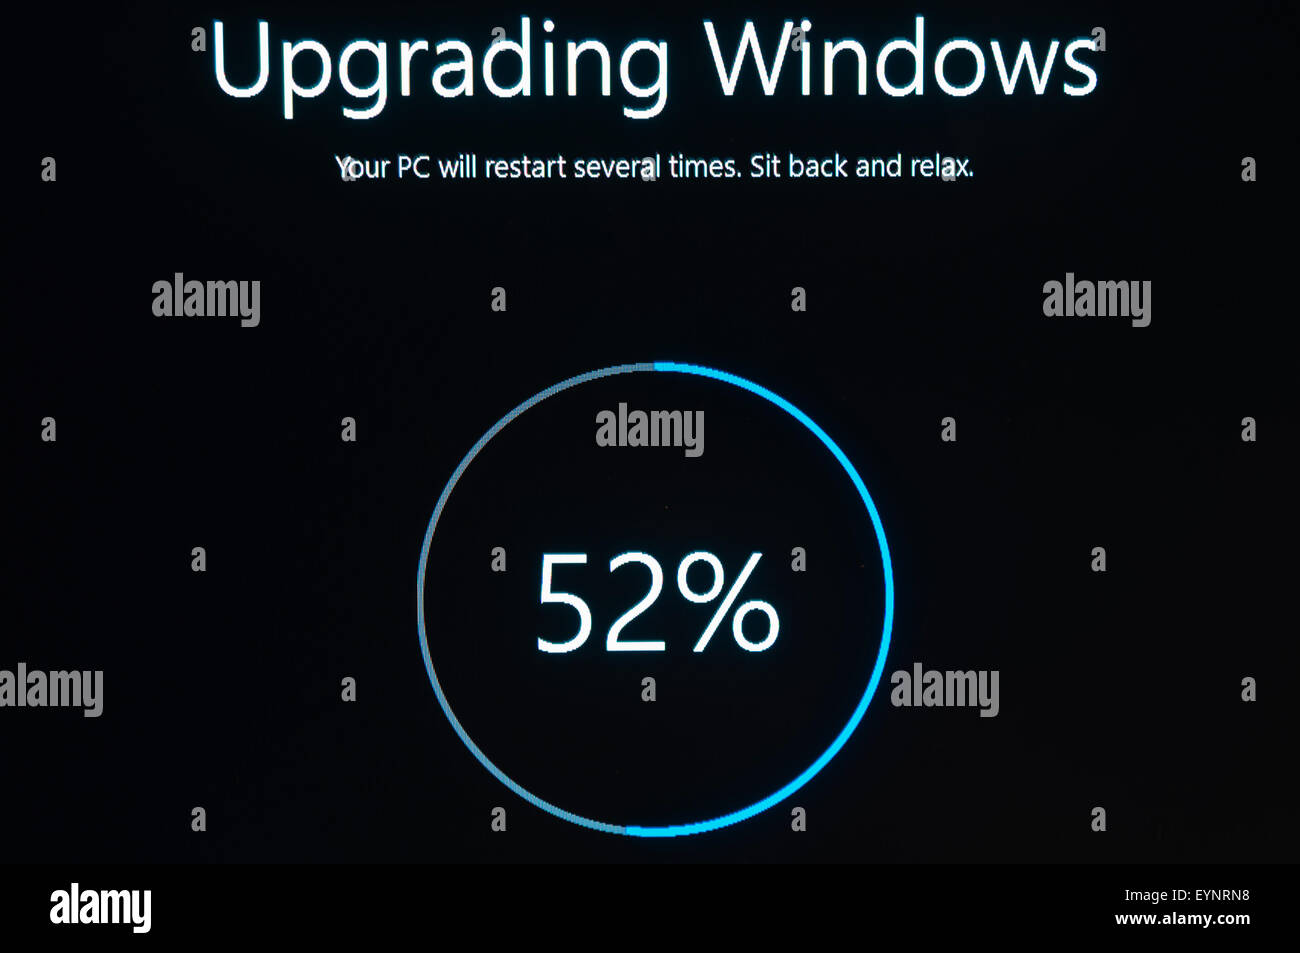 01 Aug 2015 - Millions of PC users around the world have been installing Windows 10 as part of a free upgrade from Windows 7, 8 and 8.1. Stock Photo